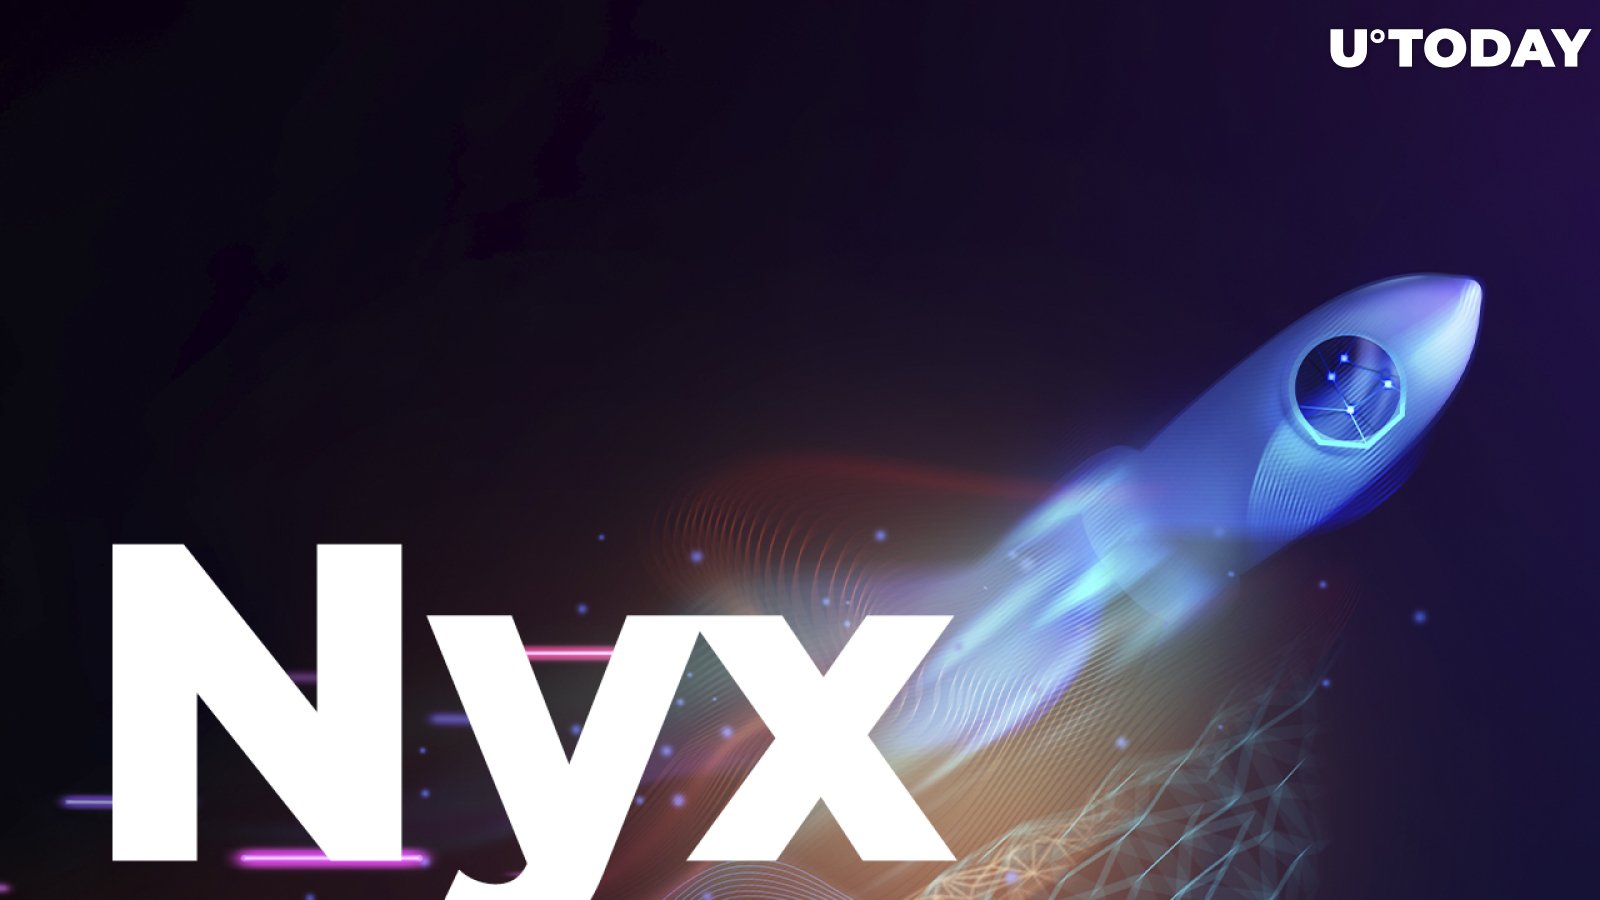 Nym Technologies Introduces Cosmos-Based Blockchain Nyx: Details